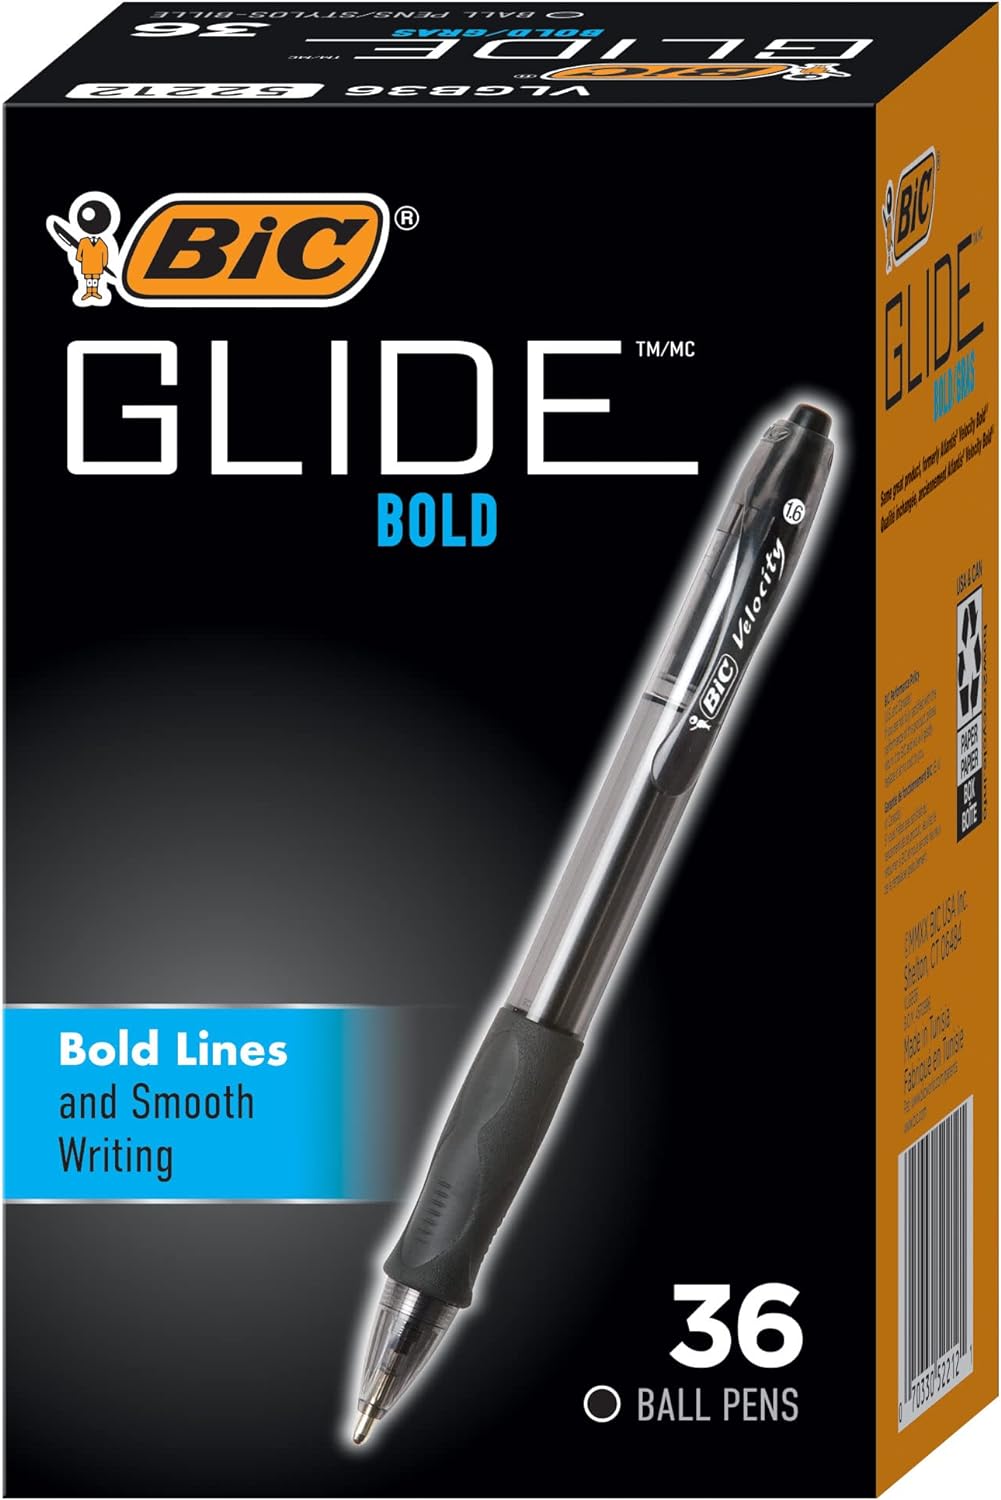 BIC Glide Bold Retractable Ballpoint Pens, Bold Point (1.6mm), Black Ink Pens, 36-Count Pack, Pens for School and Office Supplies (VLGB361-BLK)